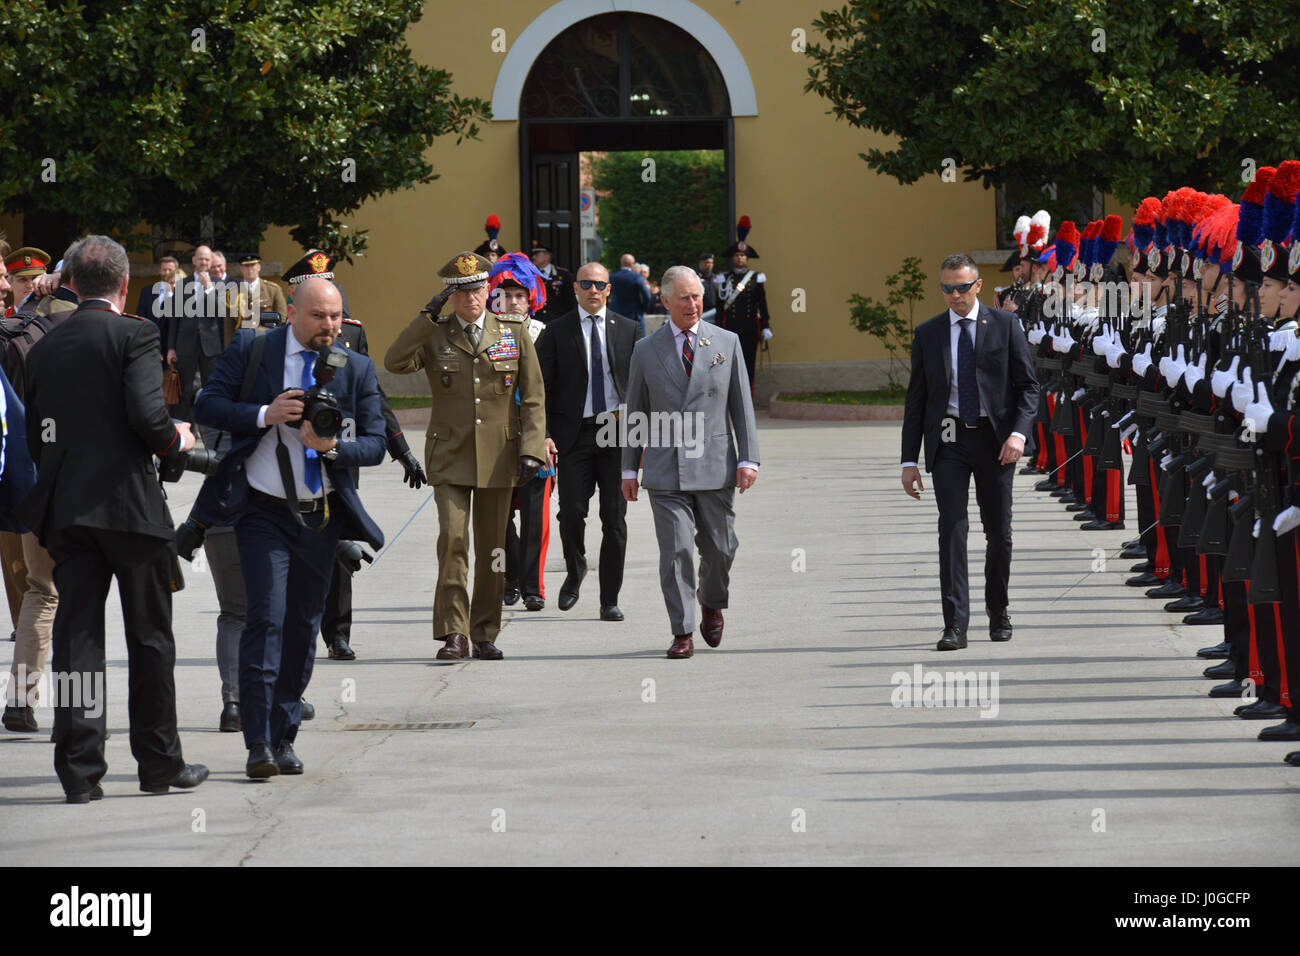 The Royal Highness, Prince Charles, Prince of Wales (right), Gen. Claudio Graziano, Italian Army Chief of Staff (center) and Gen. Tullio Del Sette, Italian Carabinieri General Commander (left), pass and review the Italian Carabinieri formation during visit at Center of Excellence for Stability Police Units (CoESPU) Vicenza, Italy, April 1, 2017. (U.S. Army Photo by Visual Information Specialist Antonio Bedin/released) Stock Photo